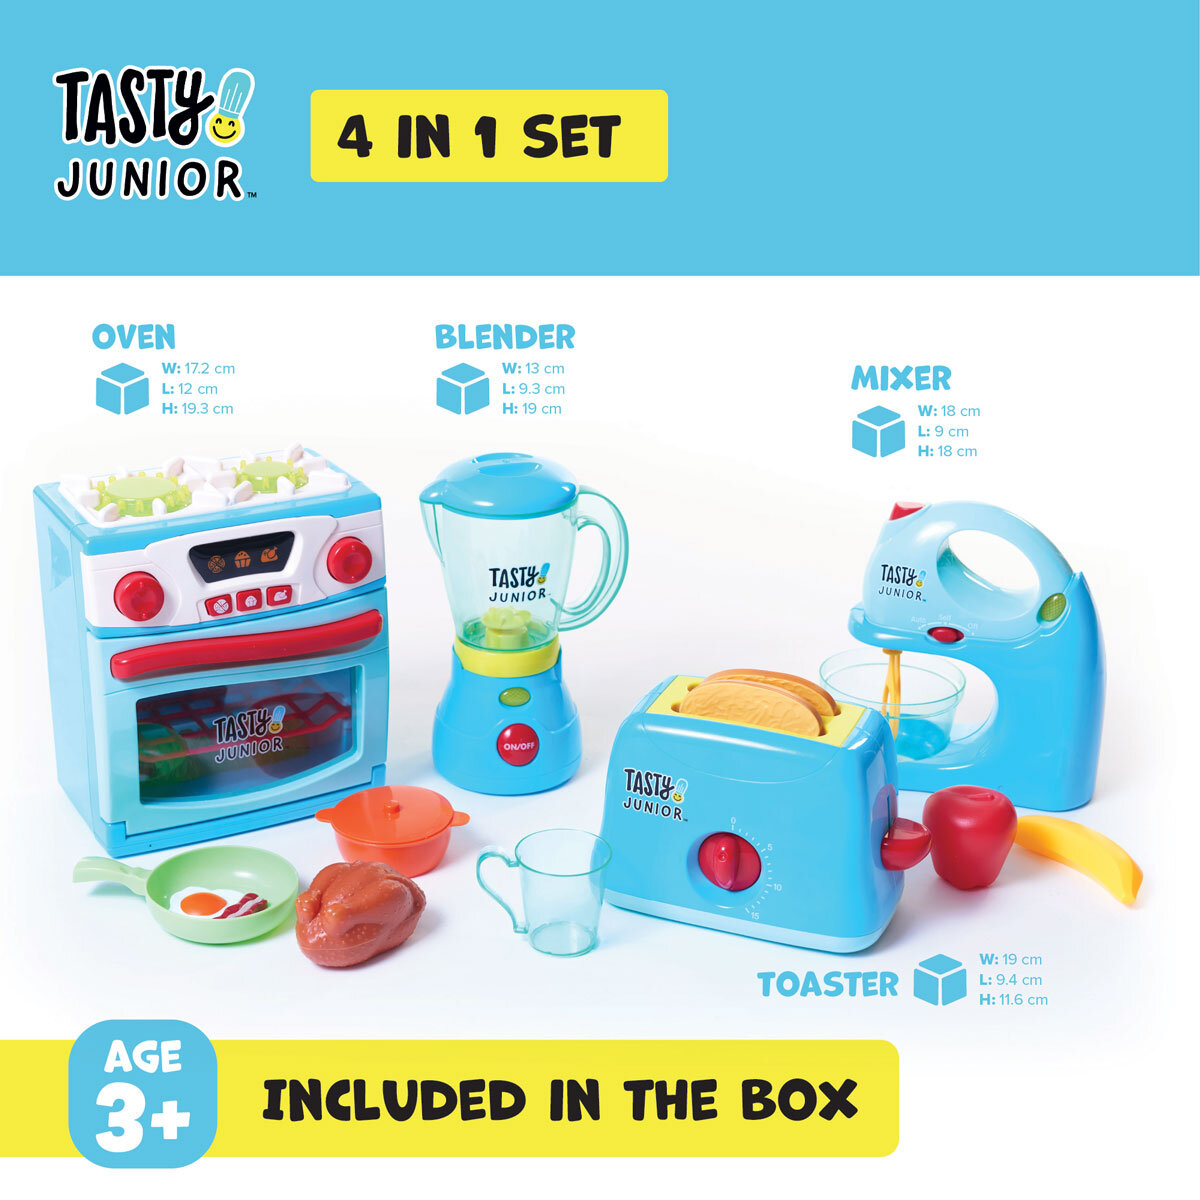 Buy Tasty 4 in 1 Set  All items Image at Costco.co.uk